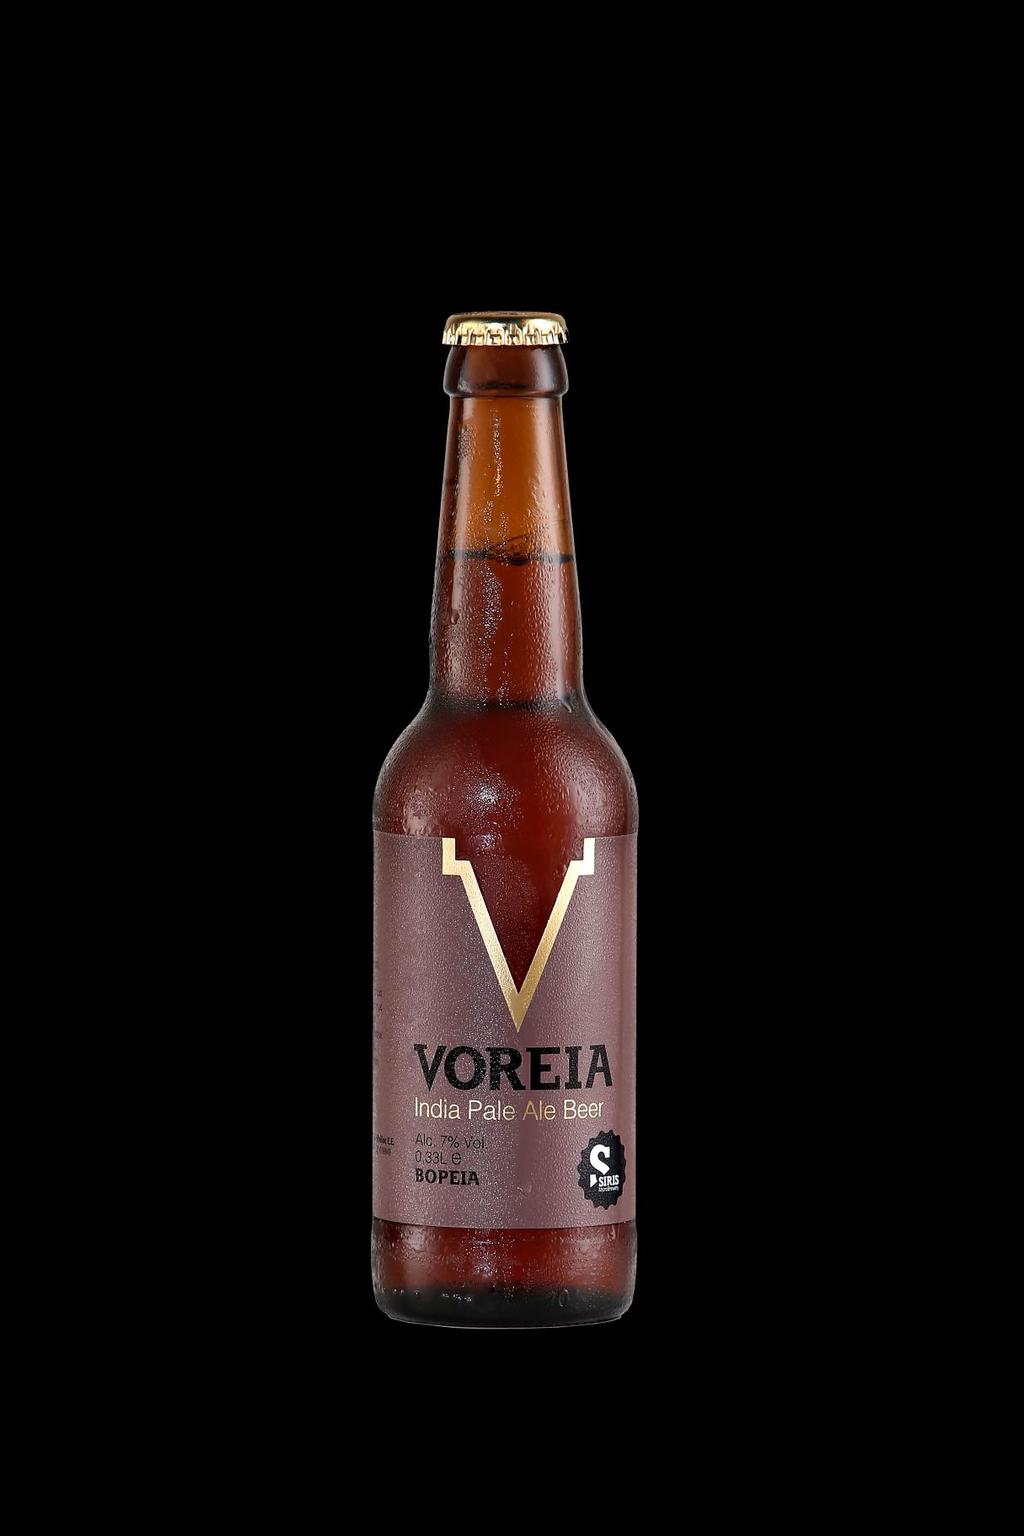 VOREIA IPA (India Pale Ale) A beer with generous addition of American hops and three kinds of malt.